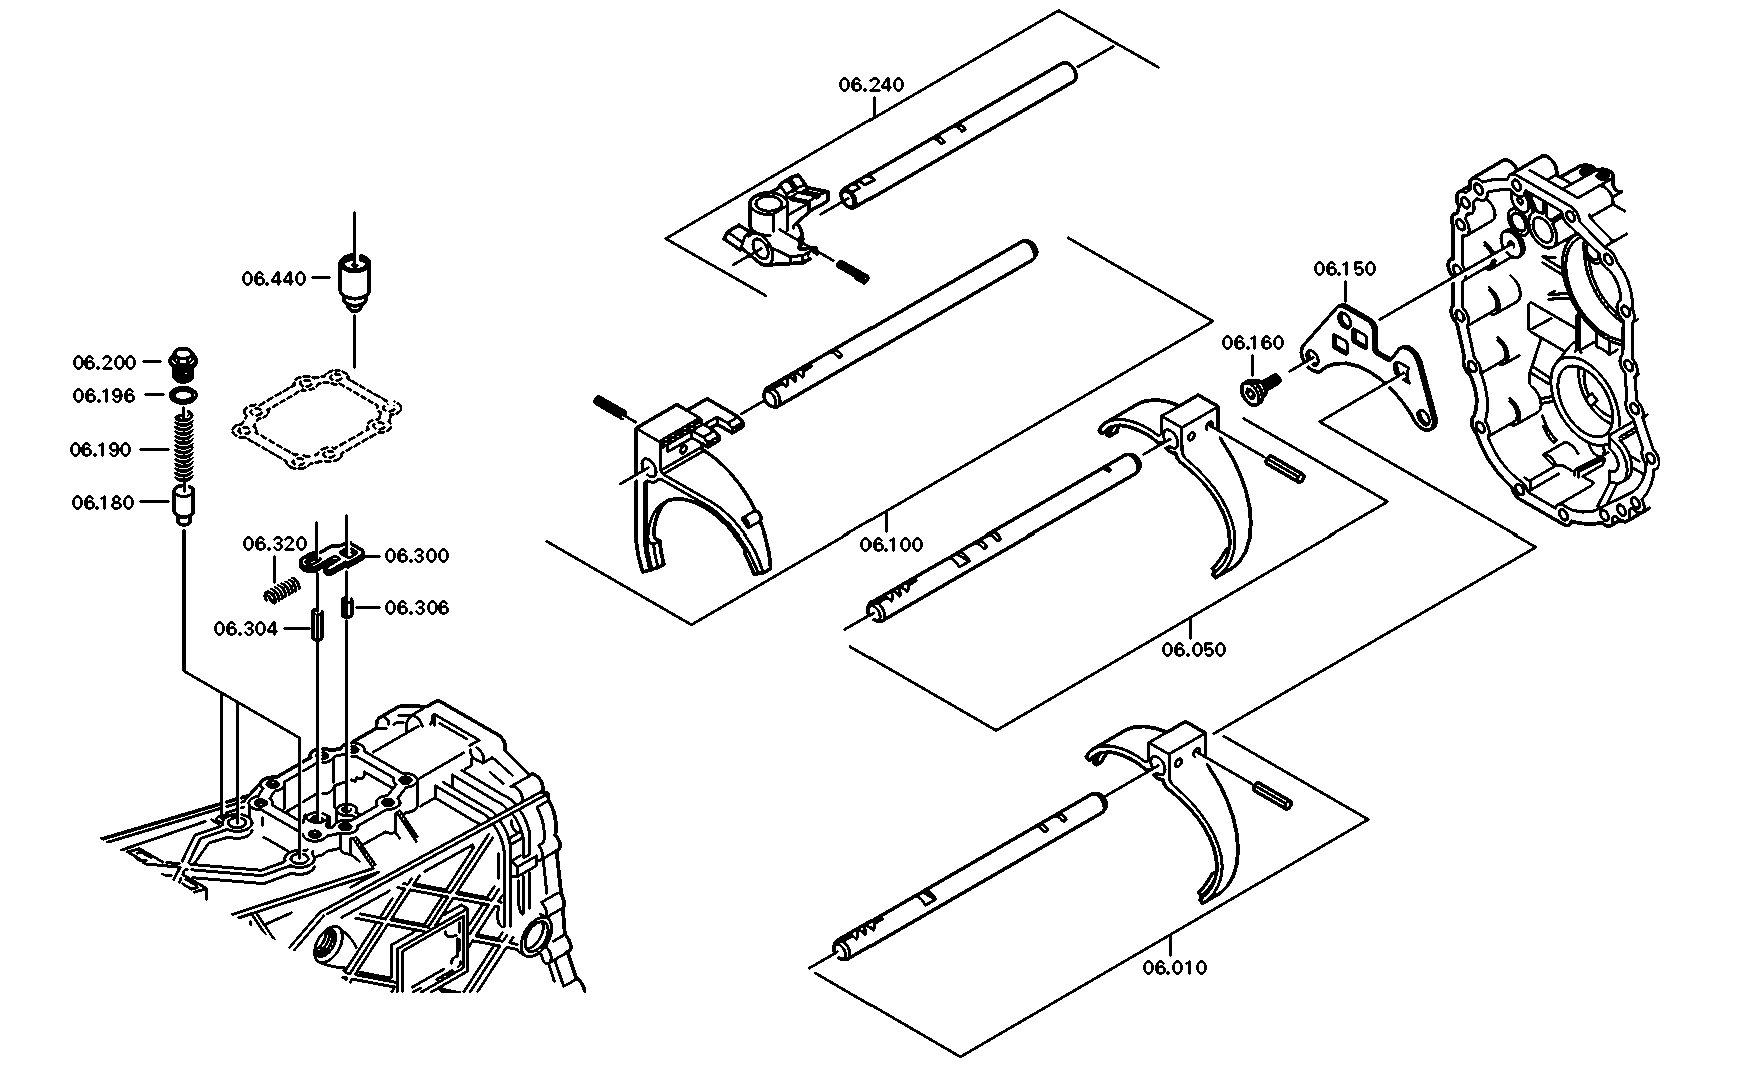 drawing for ALSTOM LHB GMBH XP52724500033 - SEALING RING (figure 1)